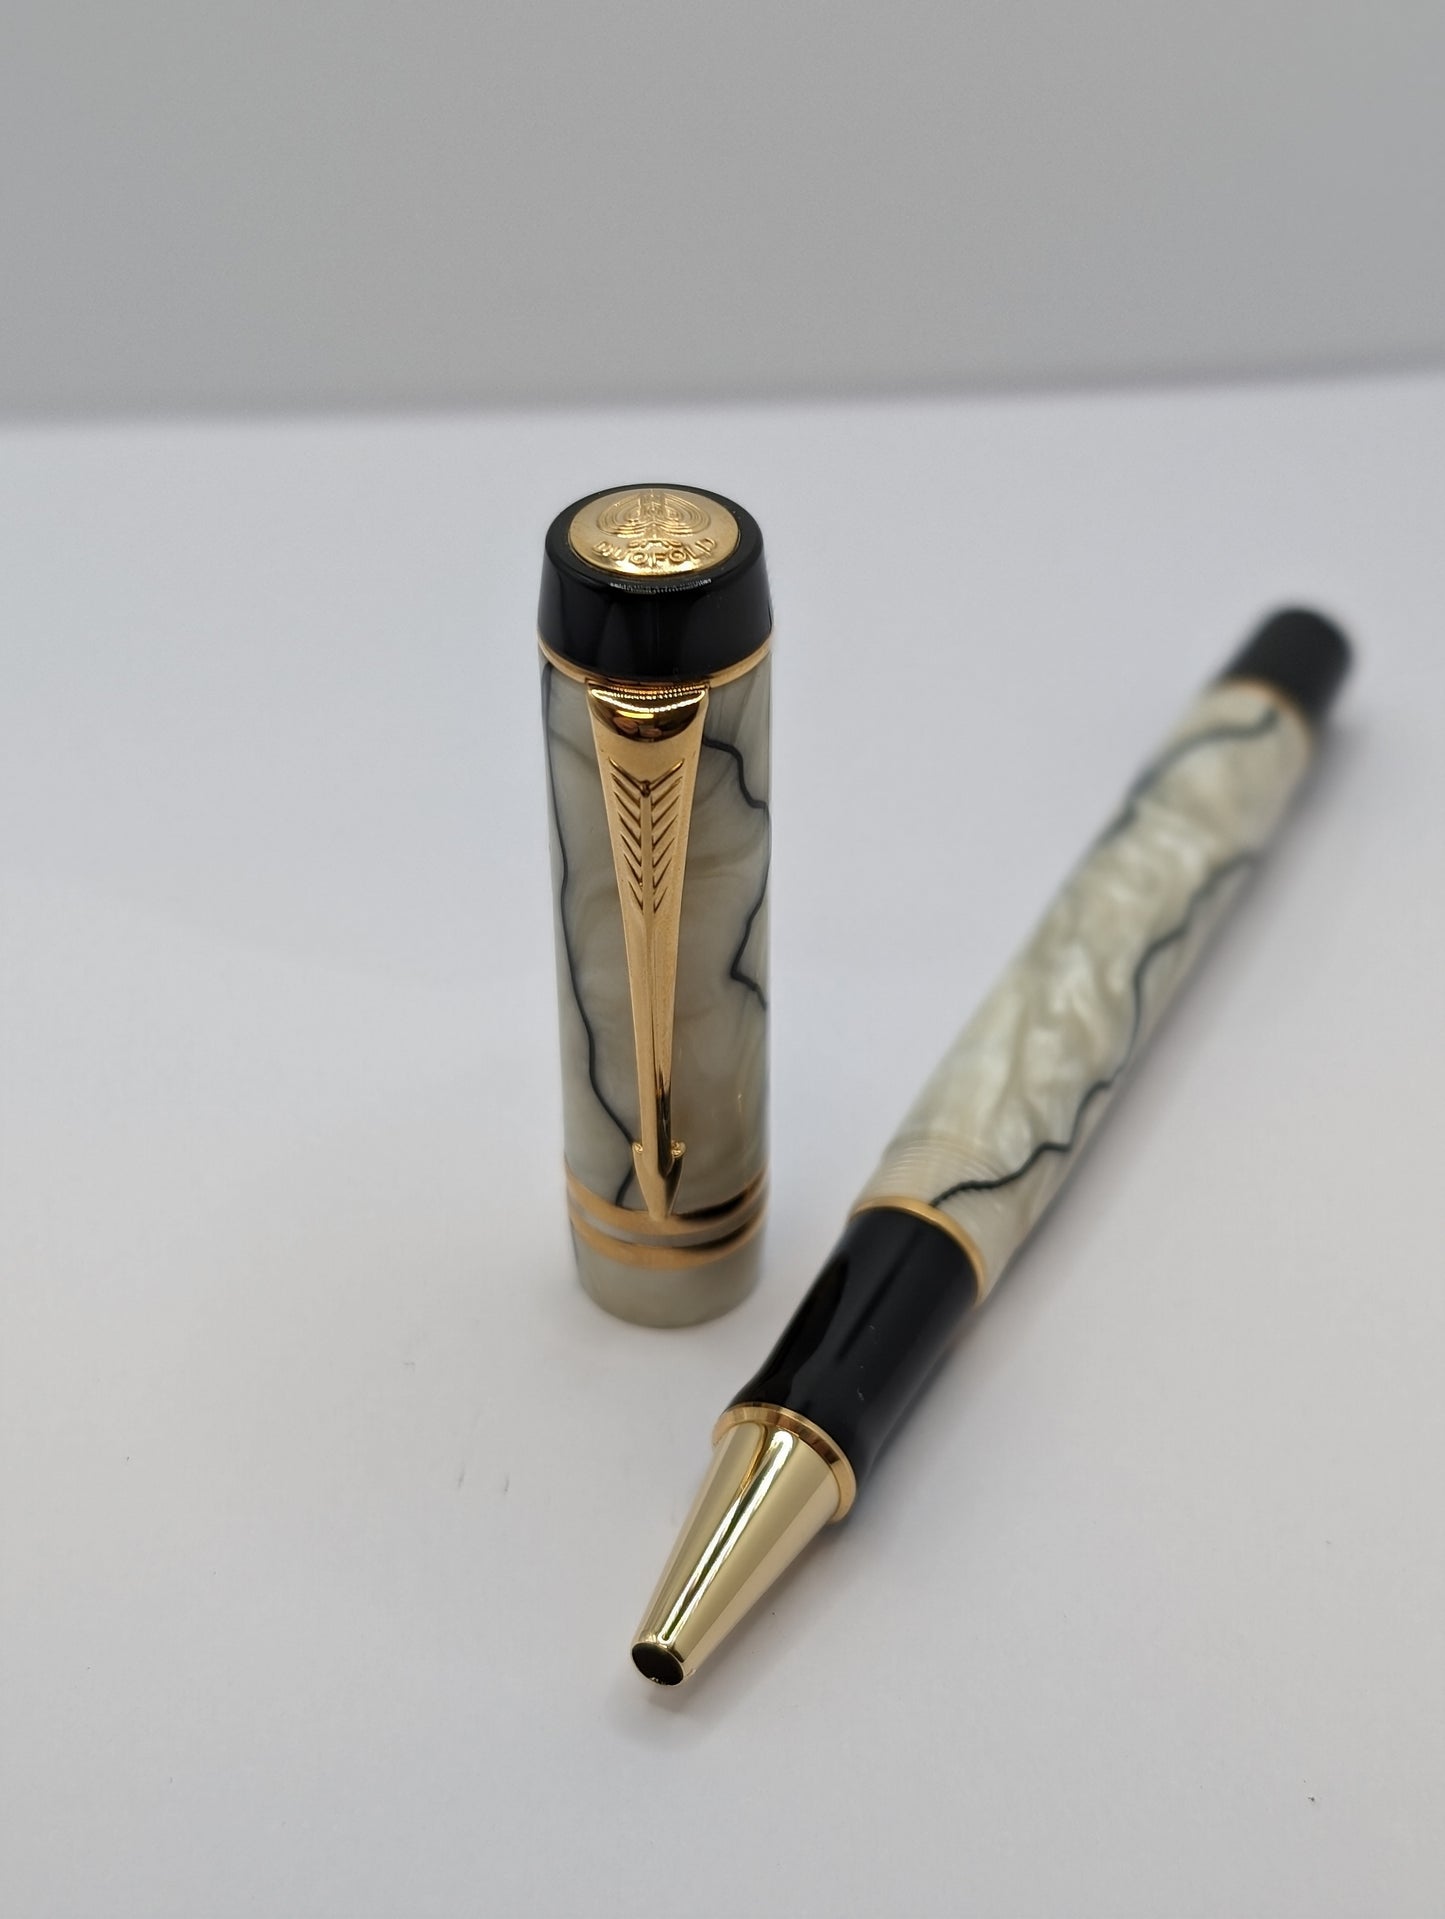 Parker Duofold Pearl and Black Ballpoint Pen